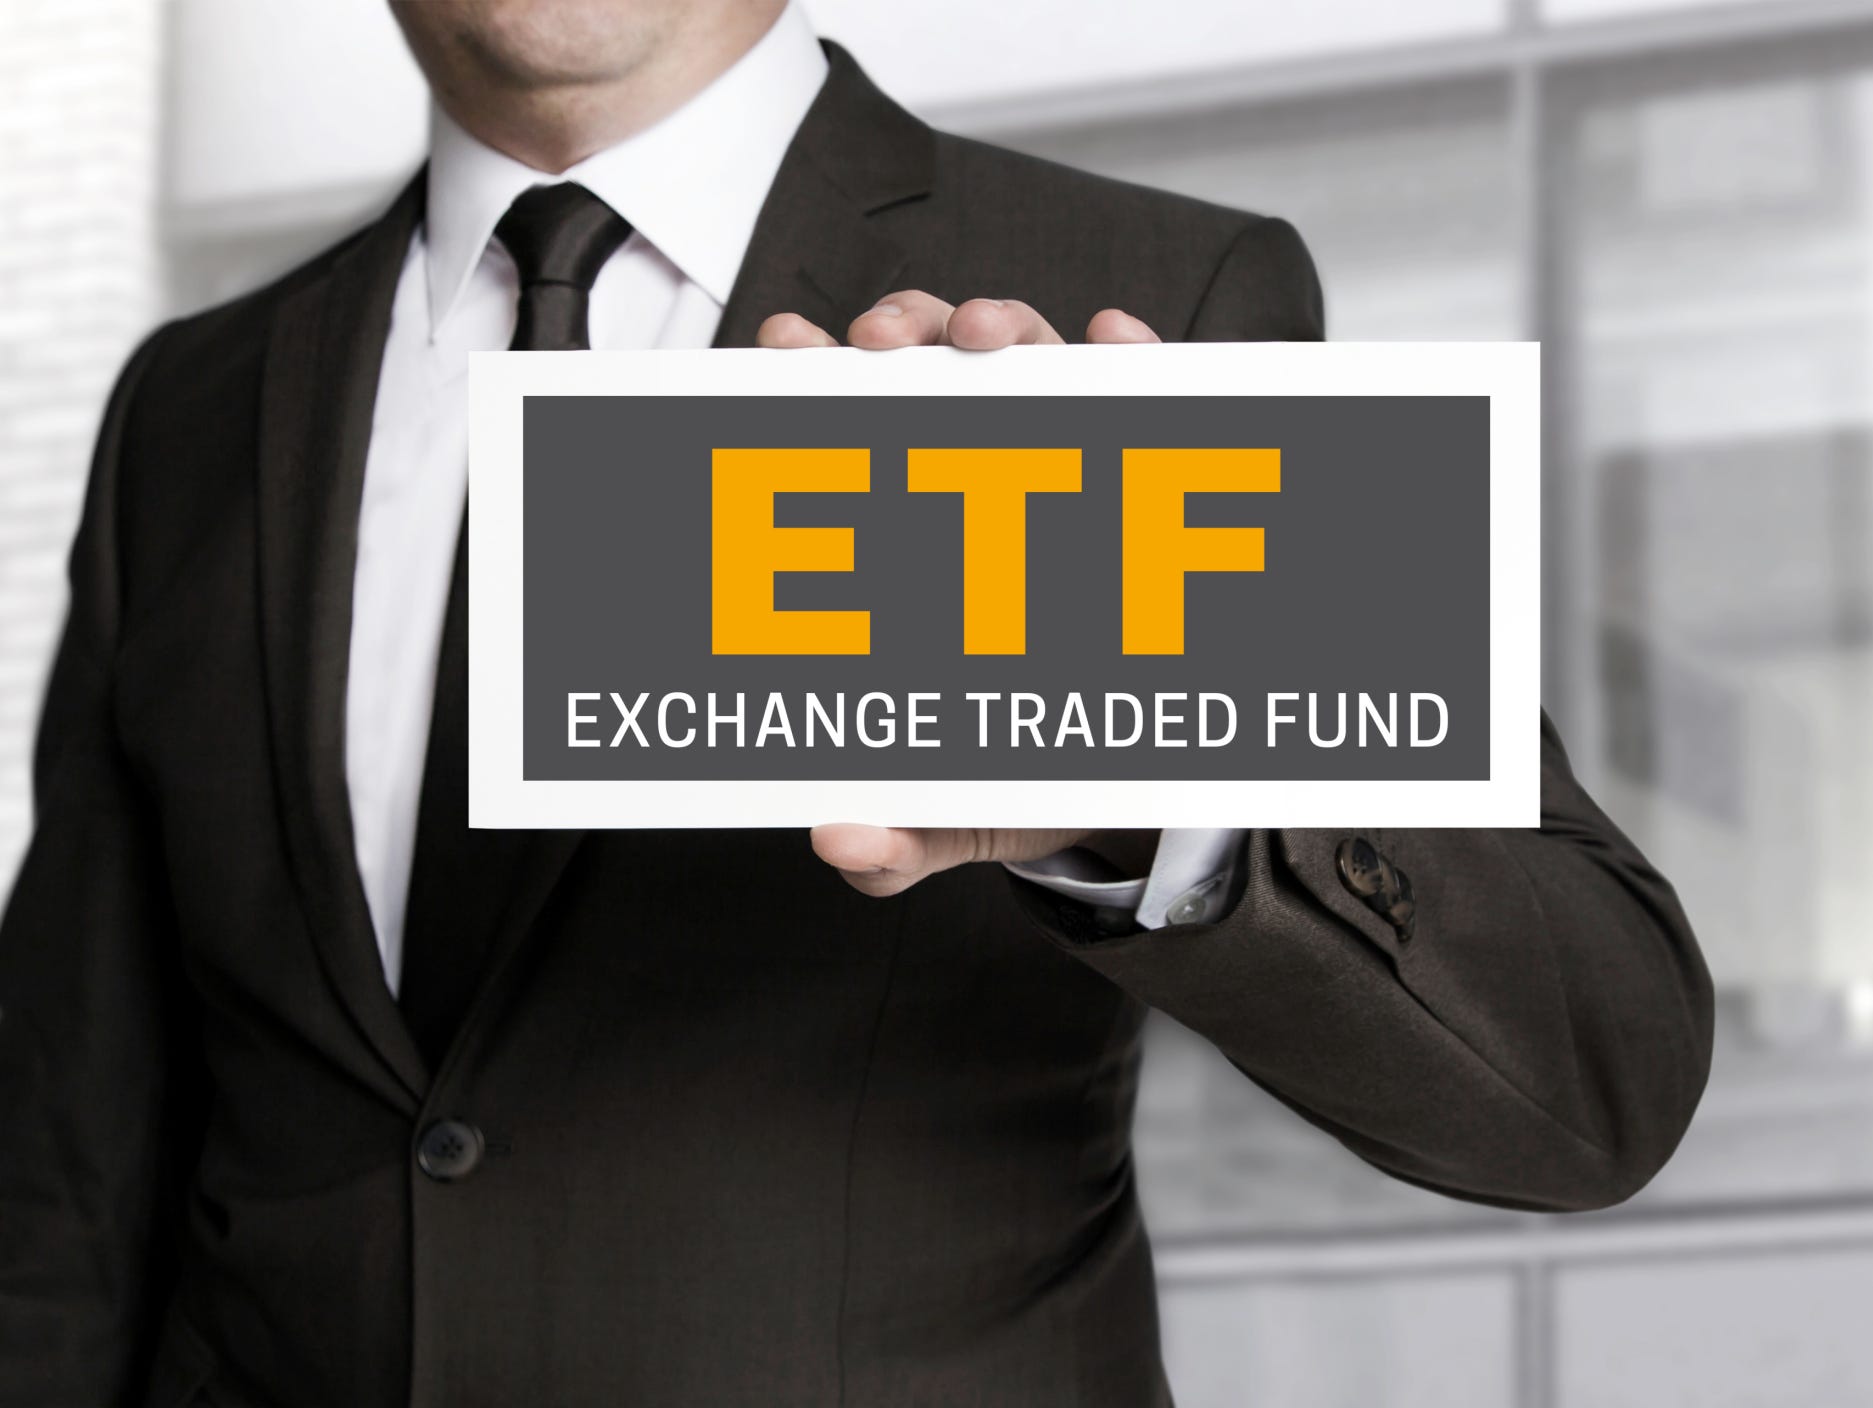 Unlike mutual funds, ETFs are priced and traded continuously during the day, allowing investors more price transparency.